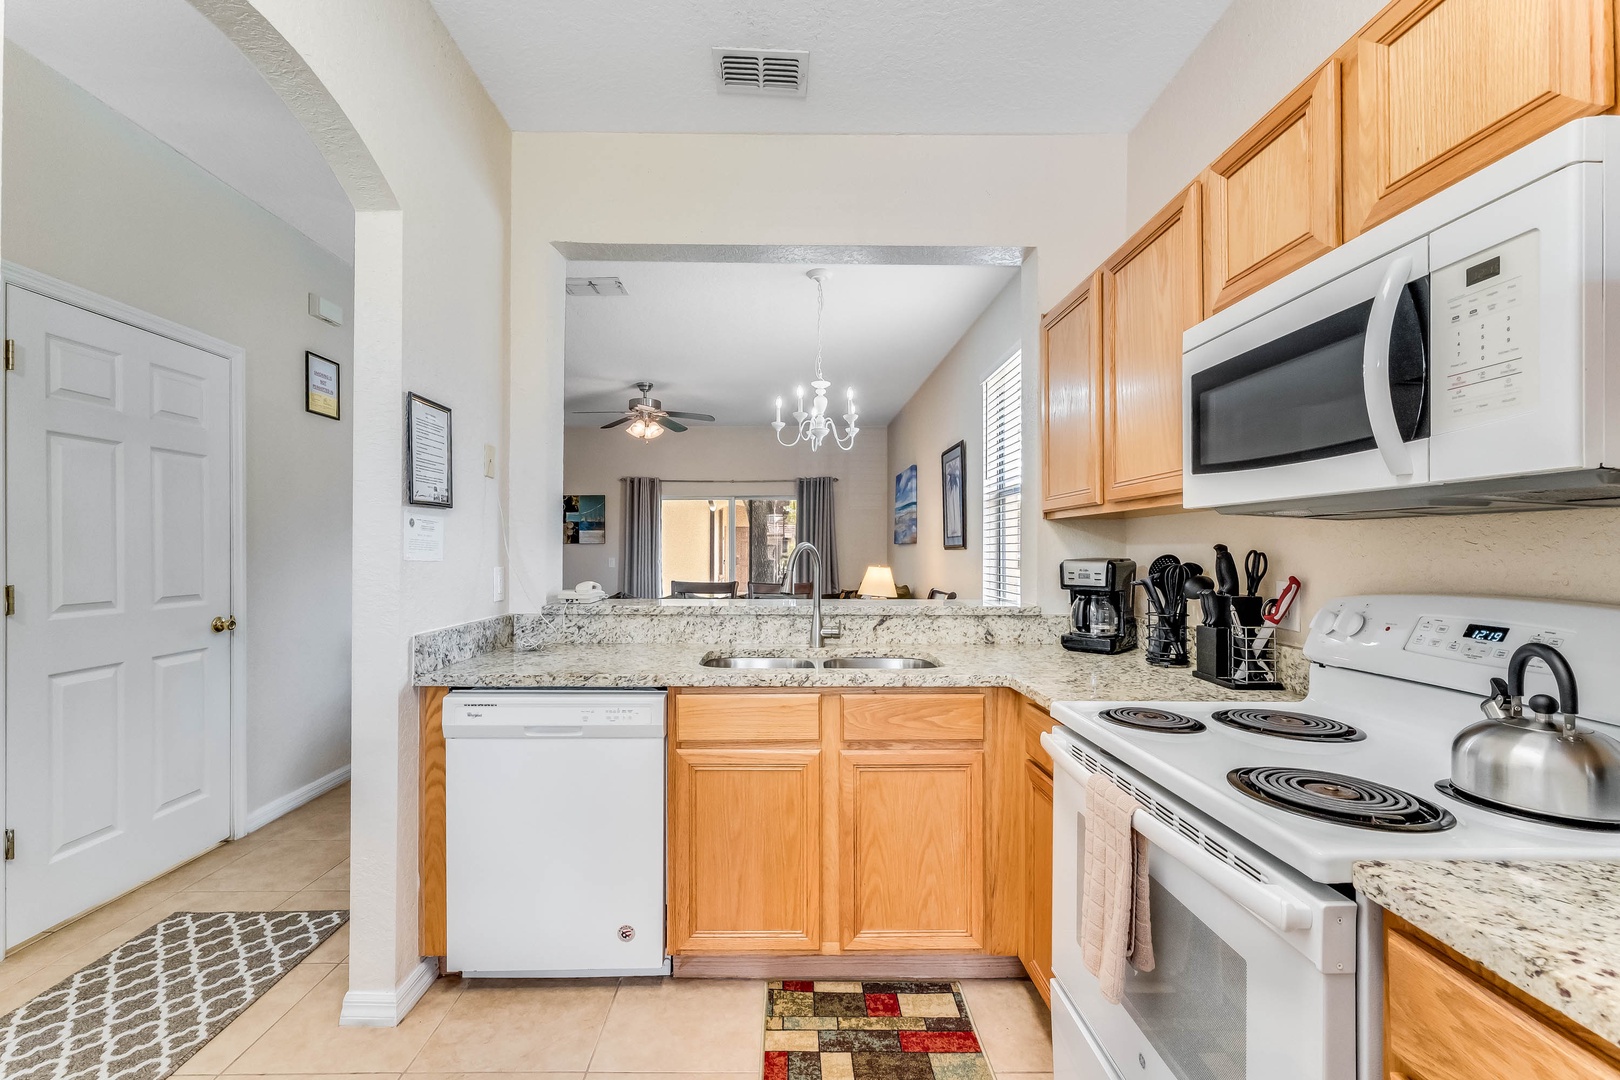 The streamlined kitchen offers ample storage space and wonderful amenities